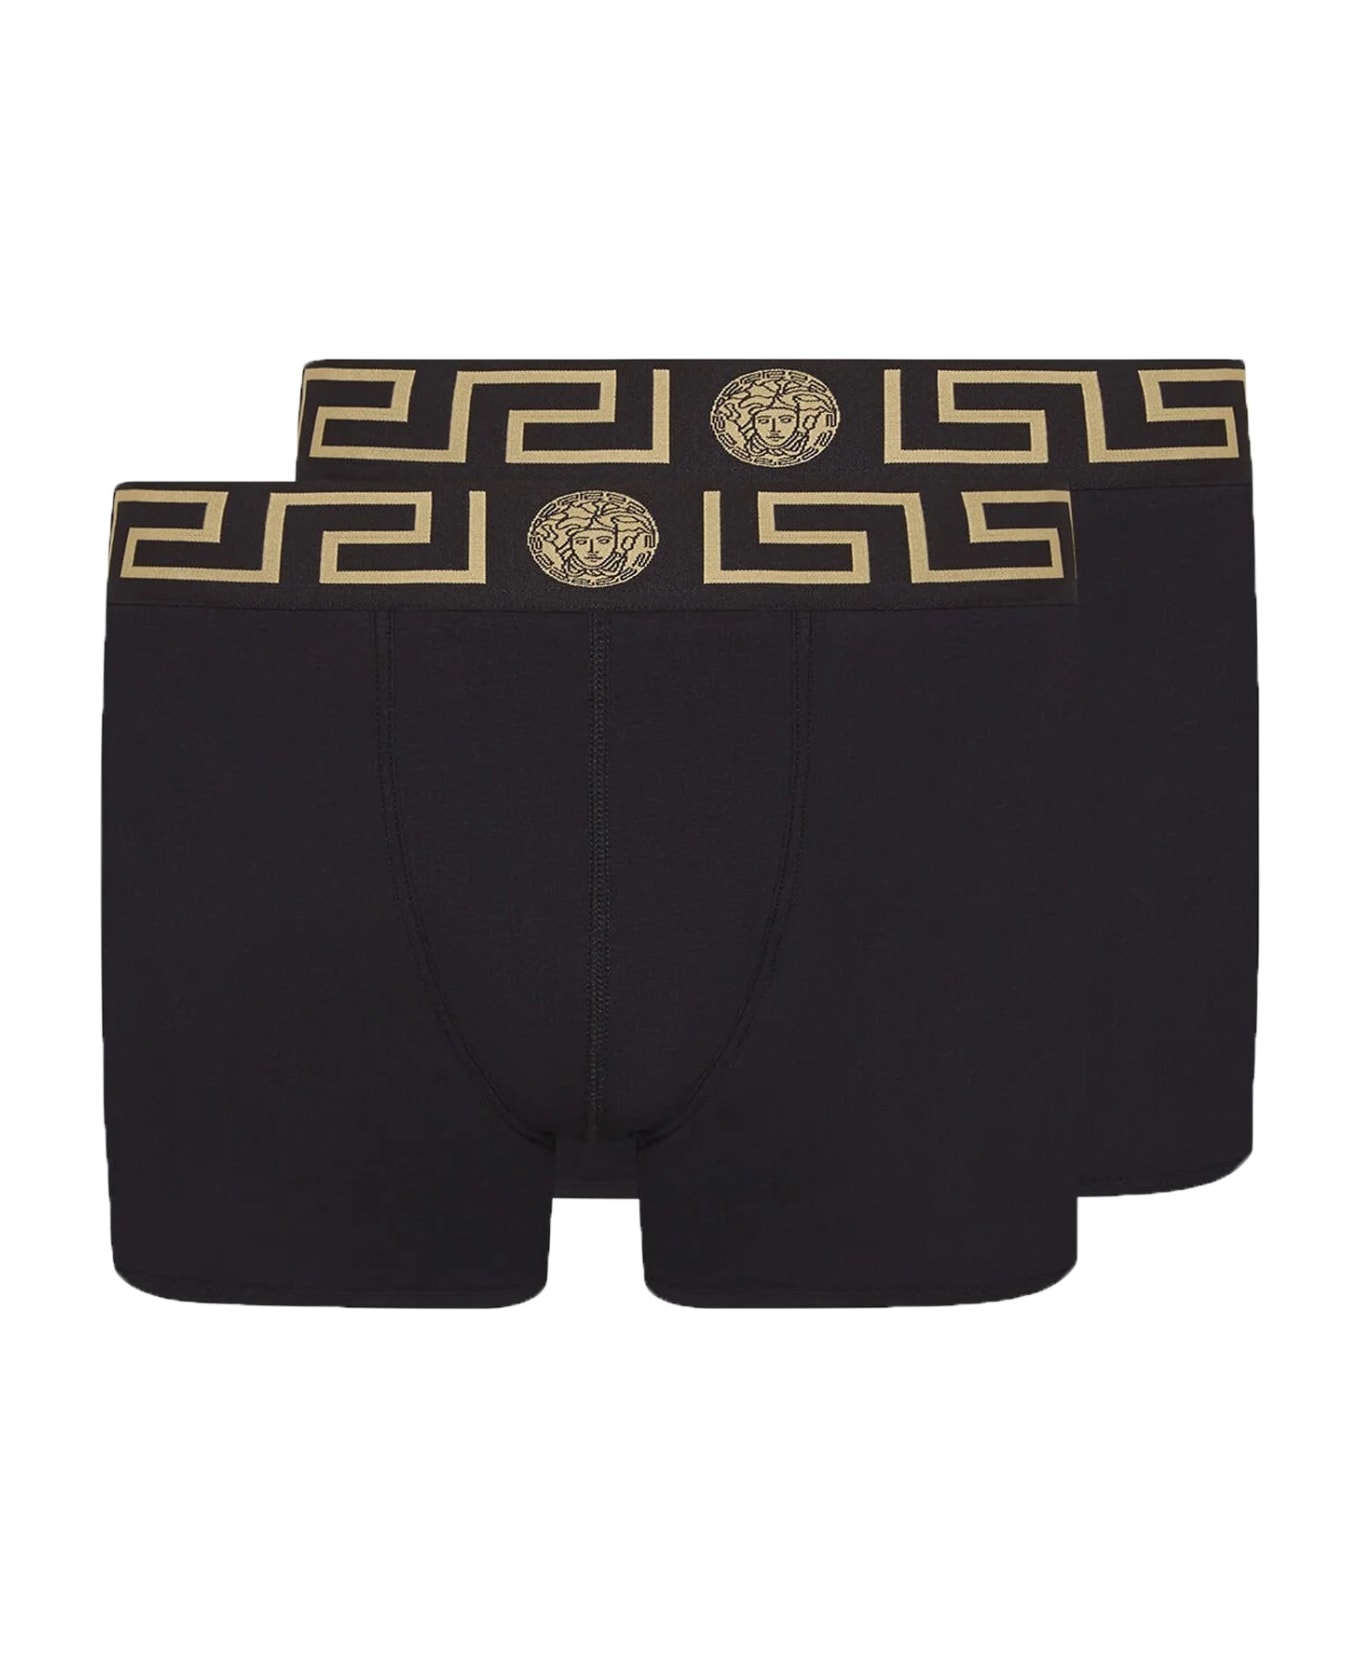 Versace Pack Of Two Boxer Shorts With Greek Motif - NERO GRECA ORO ショーツ